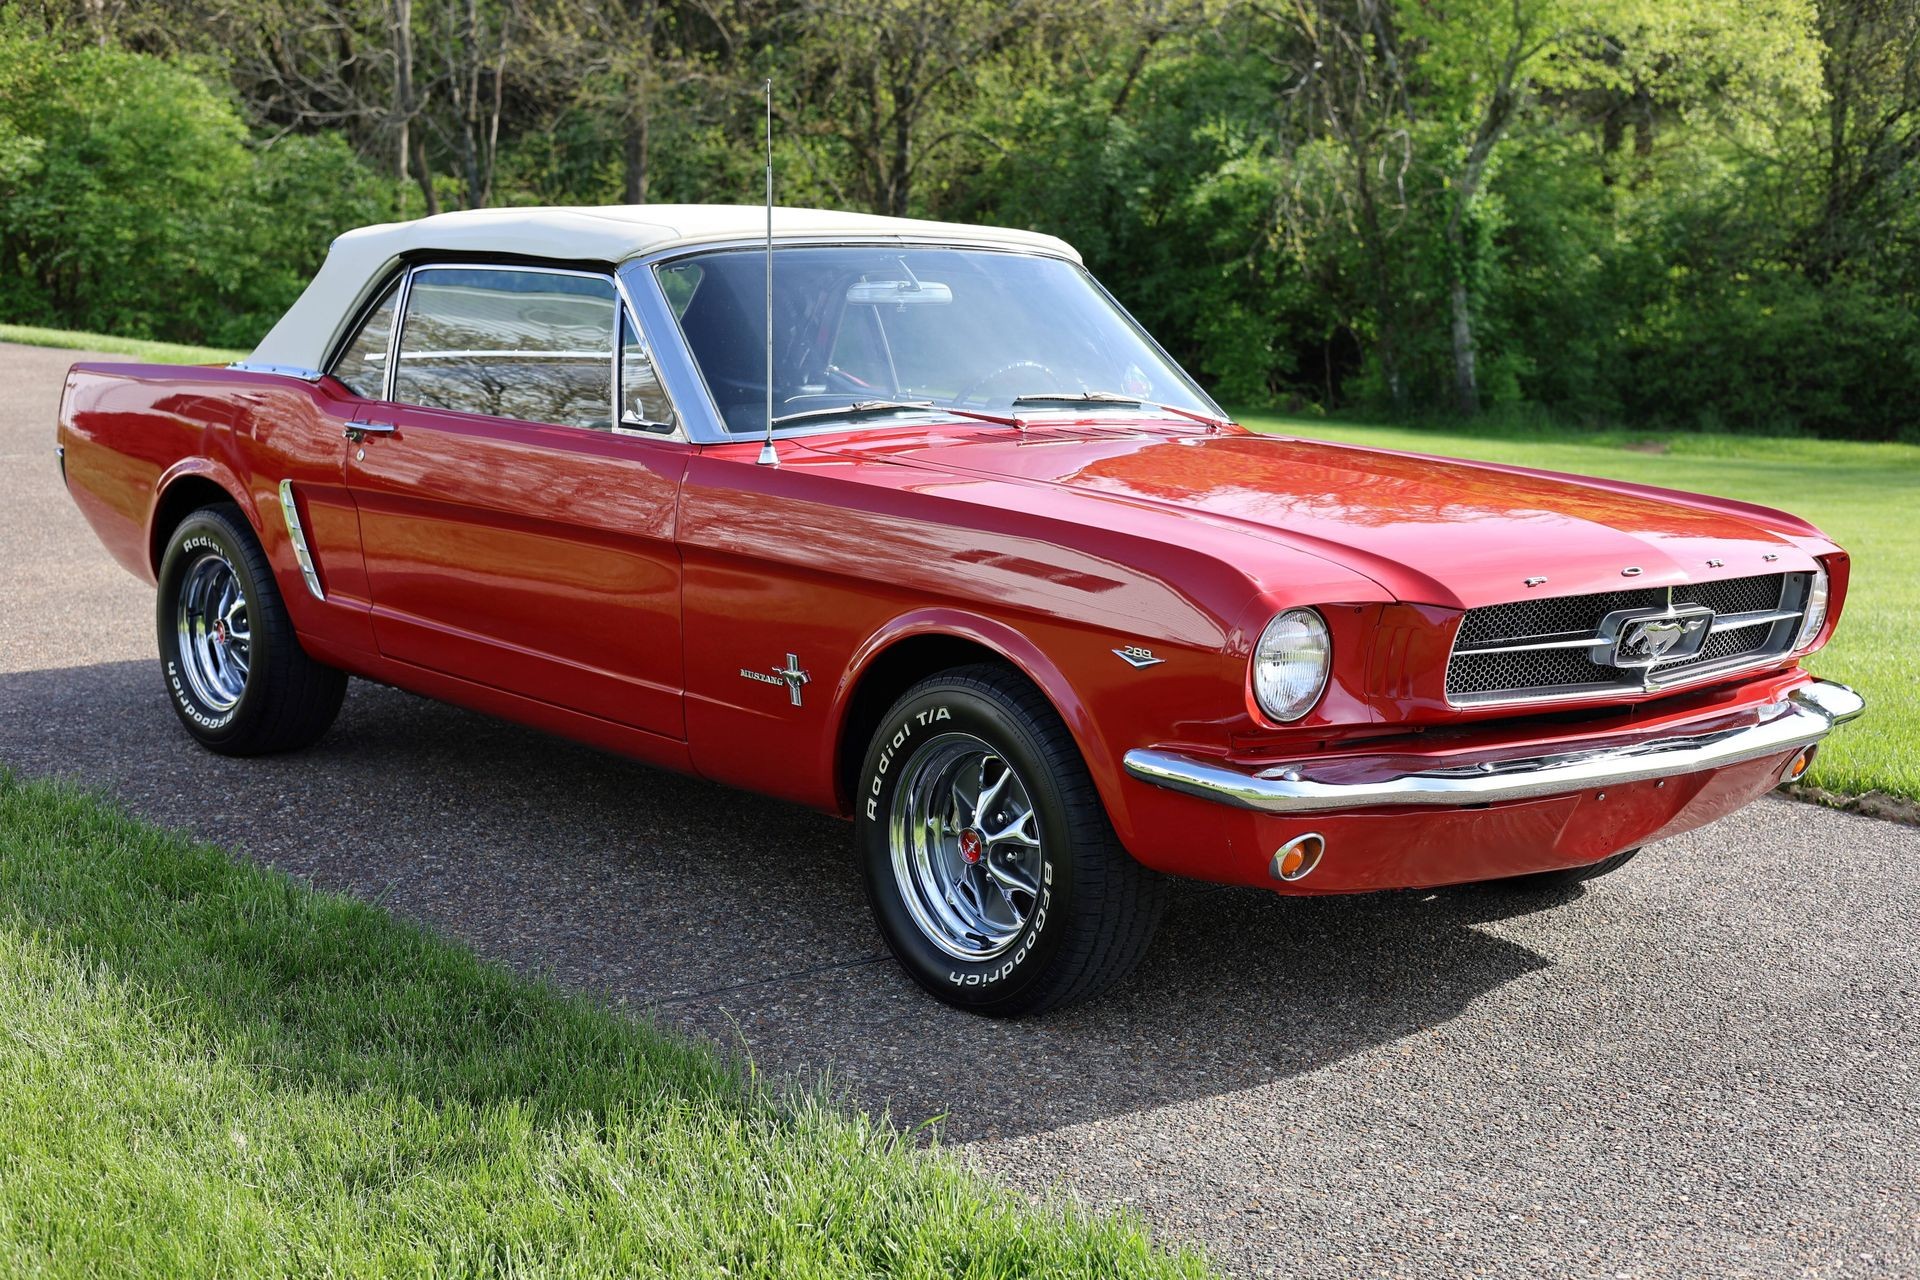 Pony Up: Five V8 Ford Mustangs For Sale That You Don't Want to Miss